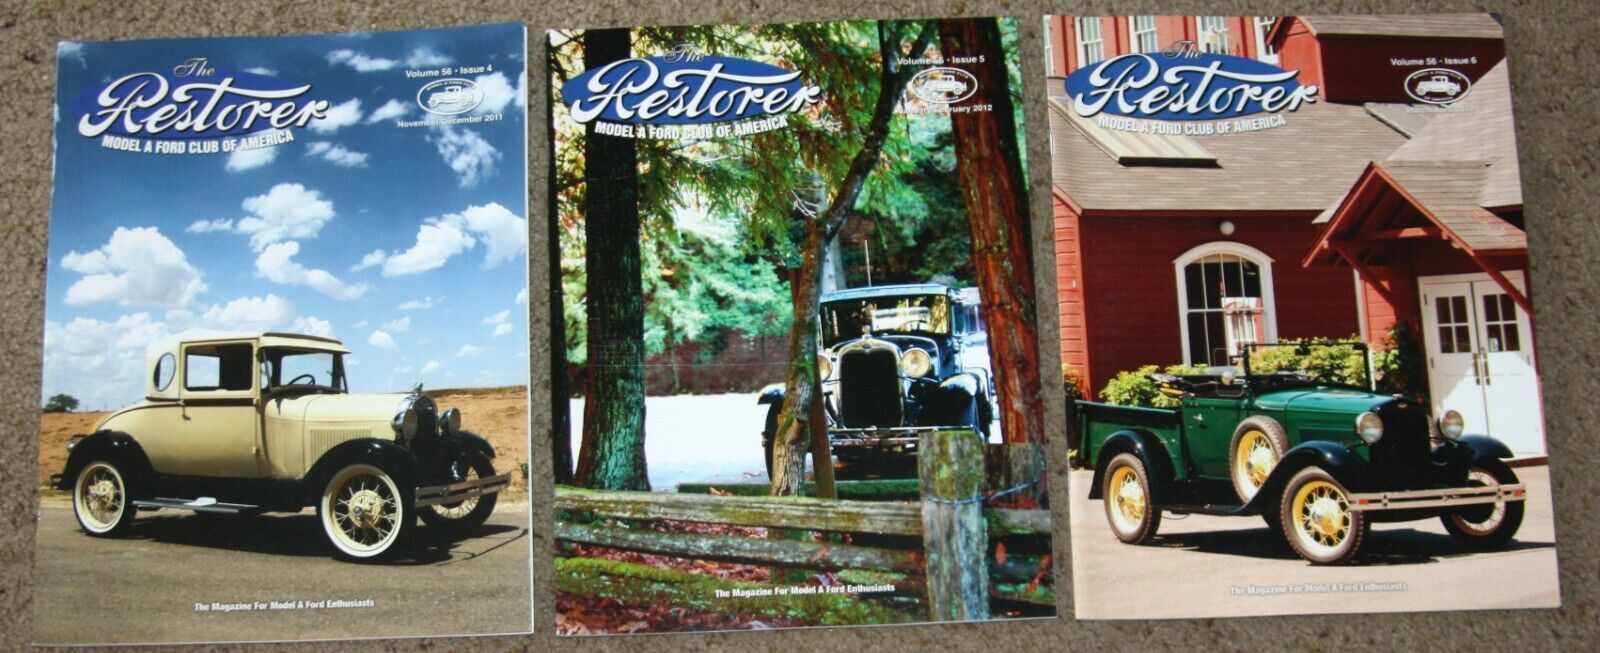 The Restorer Model A Ford Club magazine Volume 56 2011 2012 LOT of 3 issues